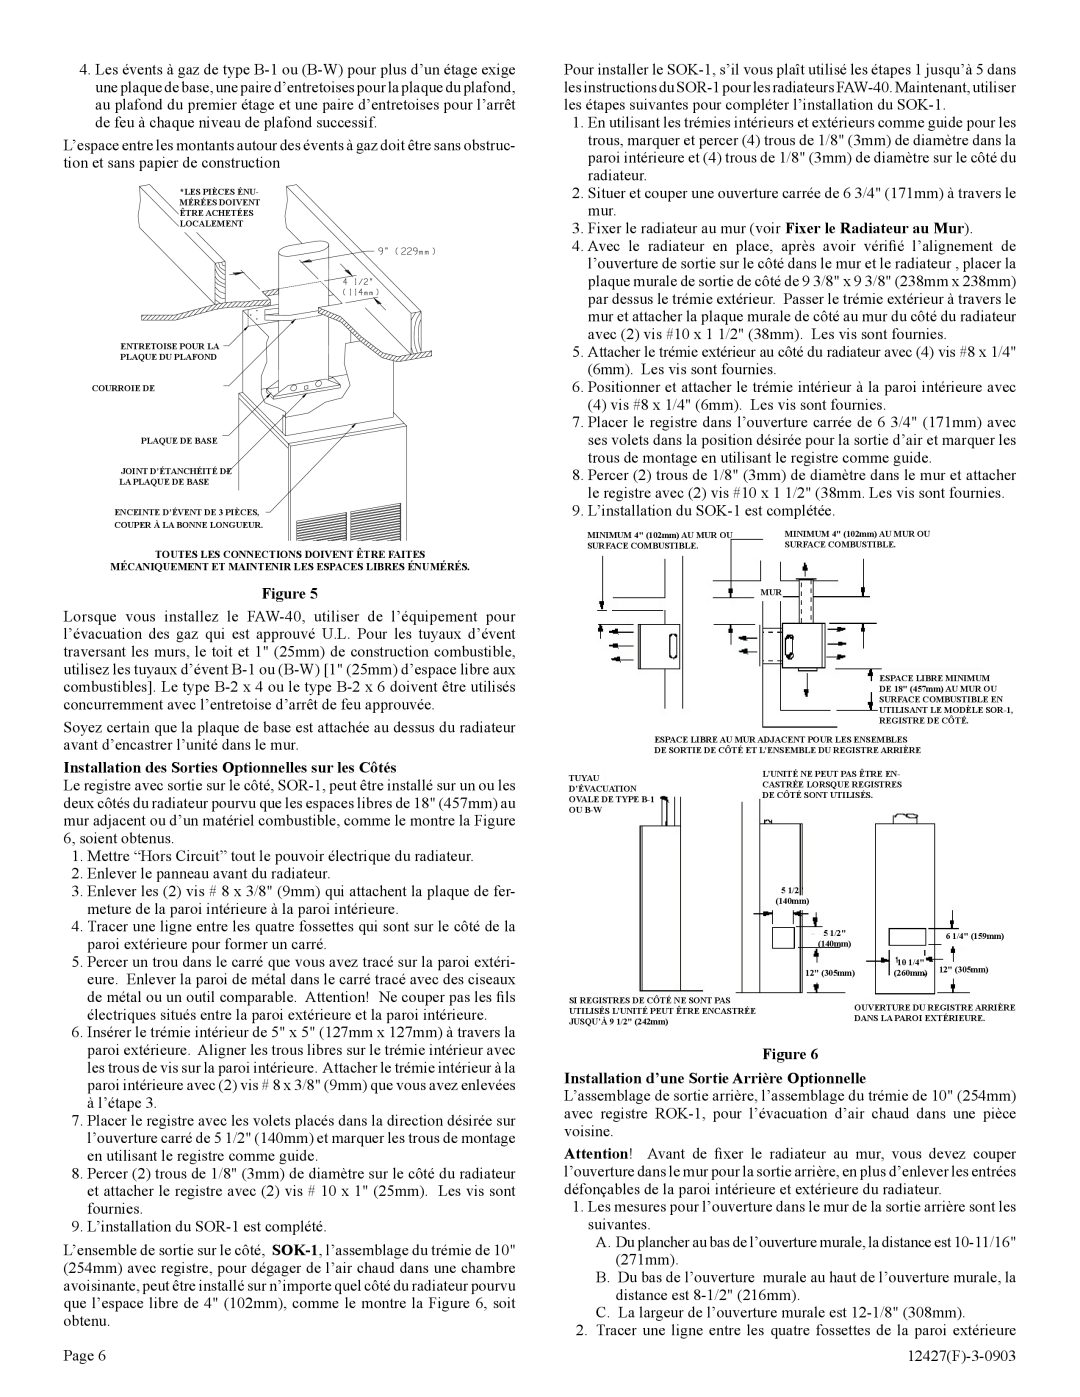 Empire Products FAW-40-1IP, FAW-40-1SPP installation instructions Installation d’une Sortie Arrière Optionnelle 